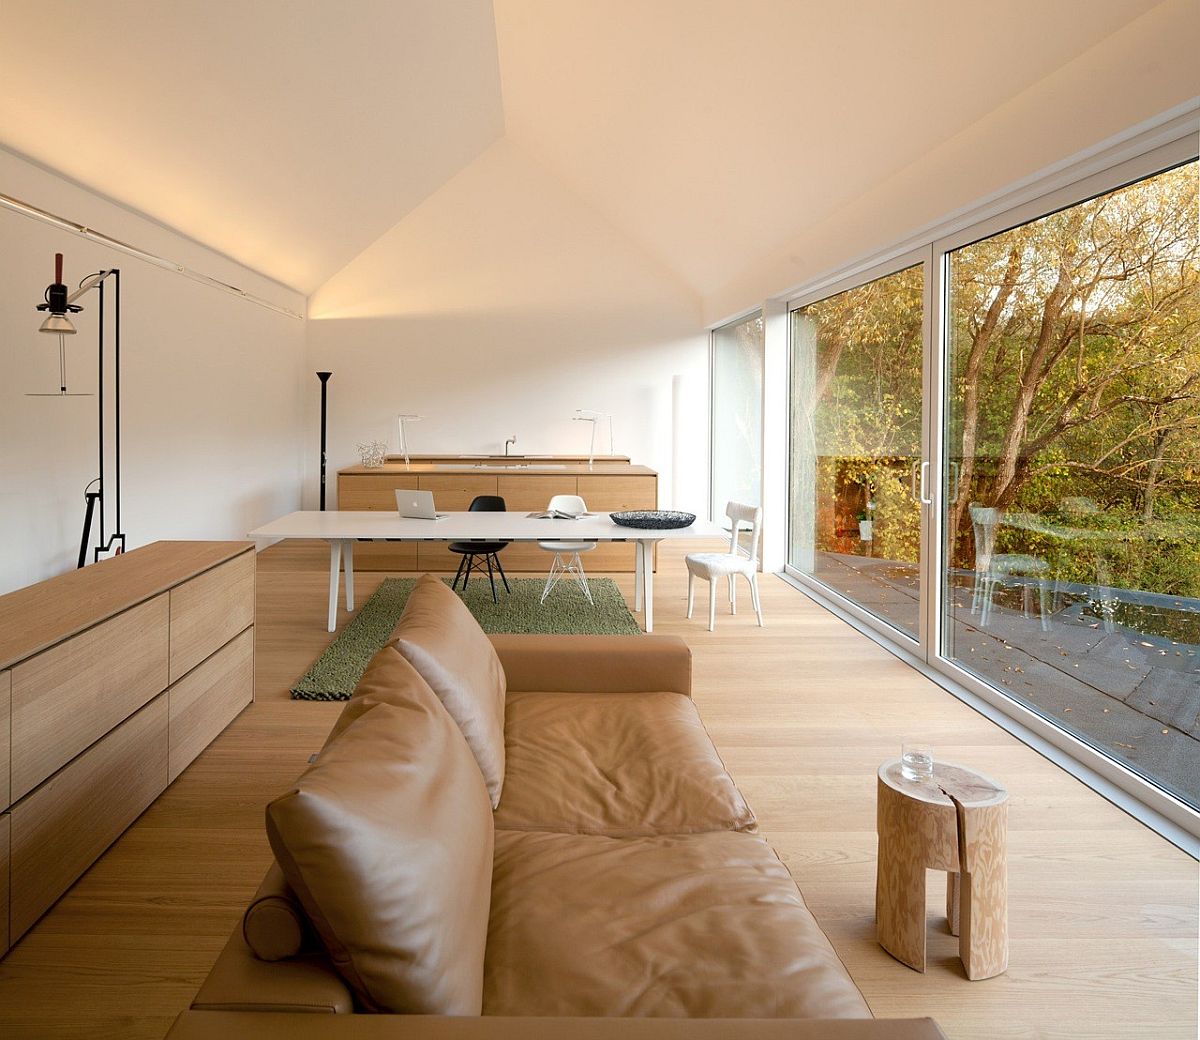 Open plan living area of the Studio House in Germany